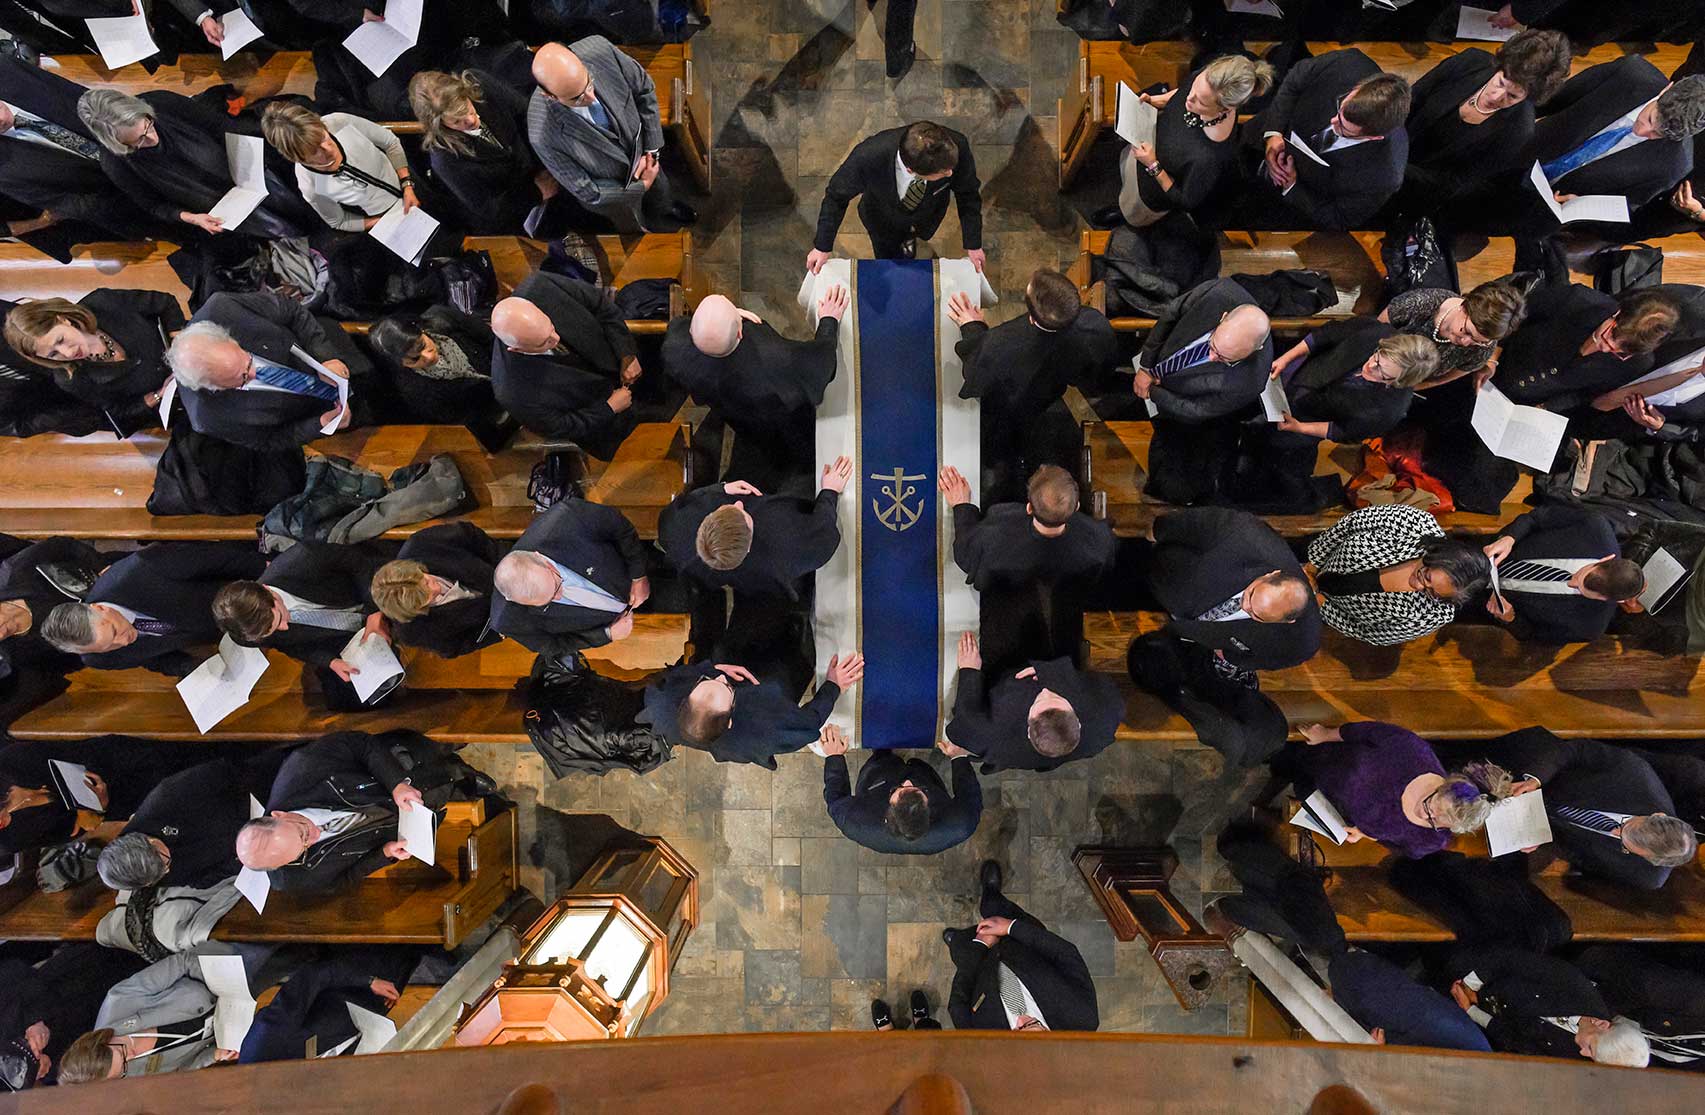 Mar. 4, 2015; The casket of President Emeritus Rev. Theodore M. Hesburgh, C.S.C. is moved toward the front of the Basilica of the Sacred Heart at the beginning of the funeral Mass. (Photo by Barbara Johnston/University of Notre Dame)